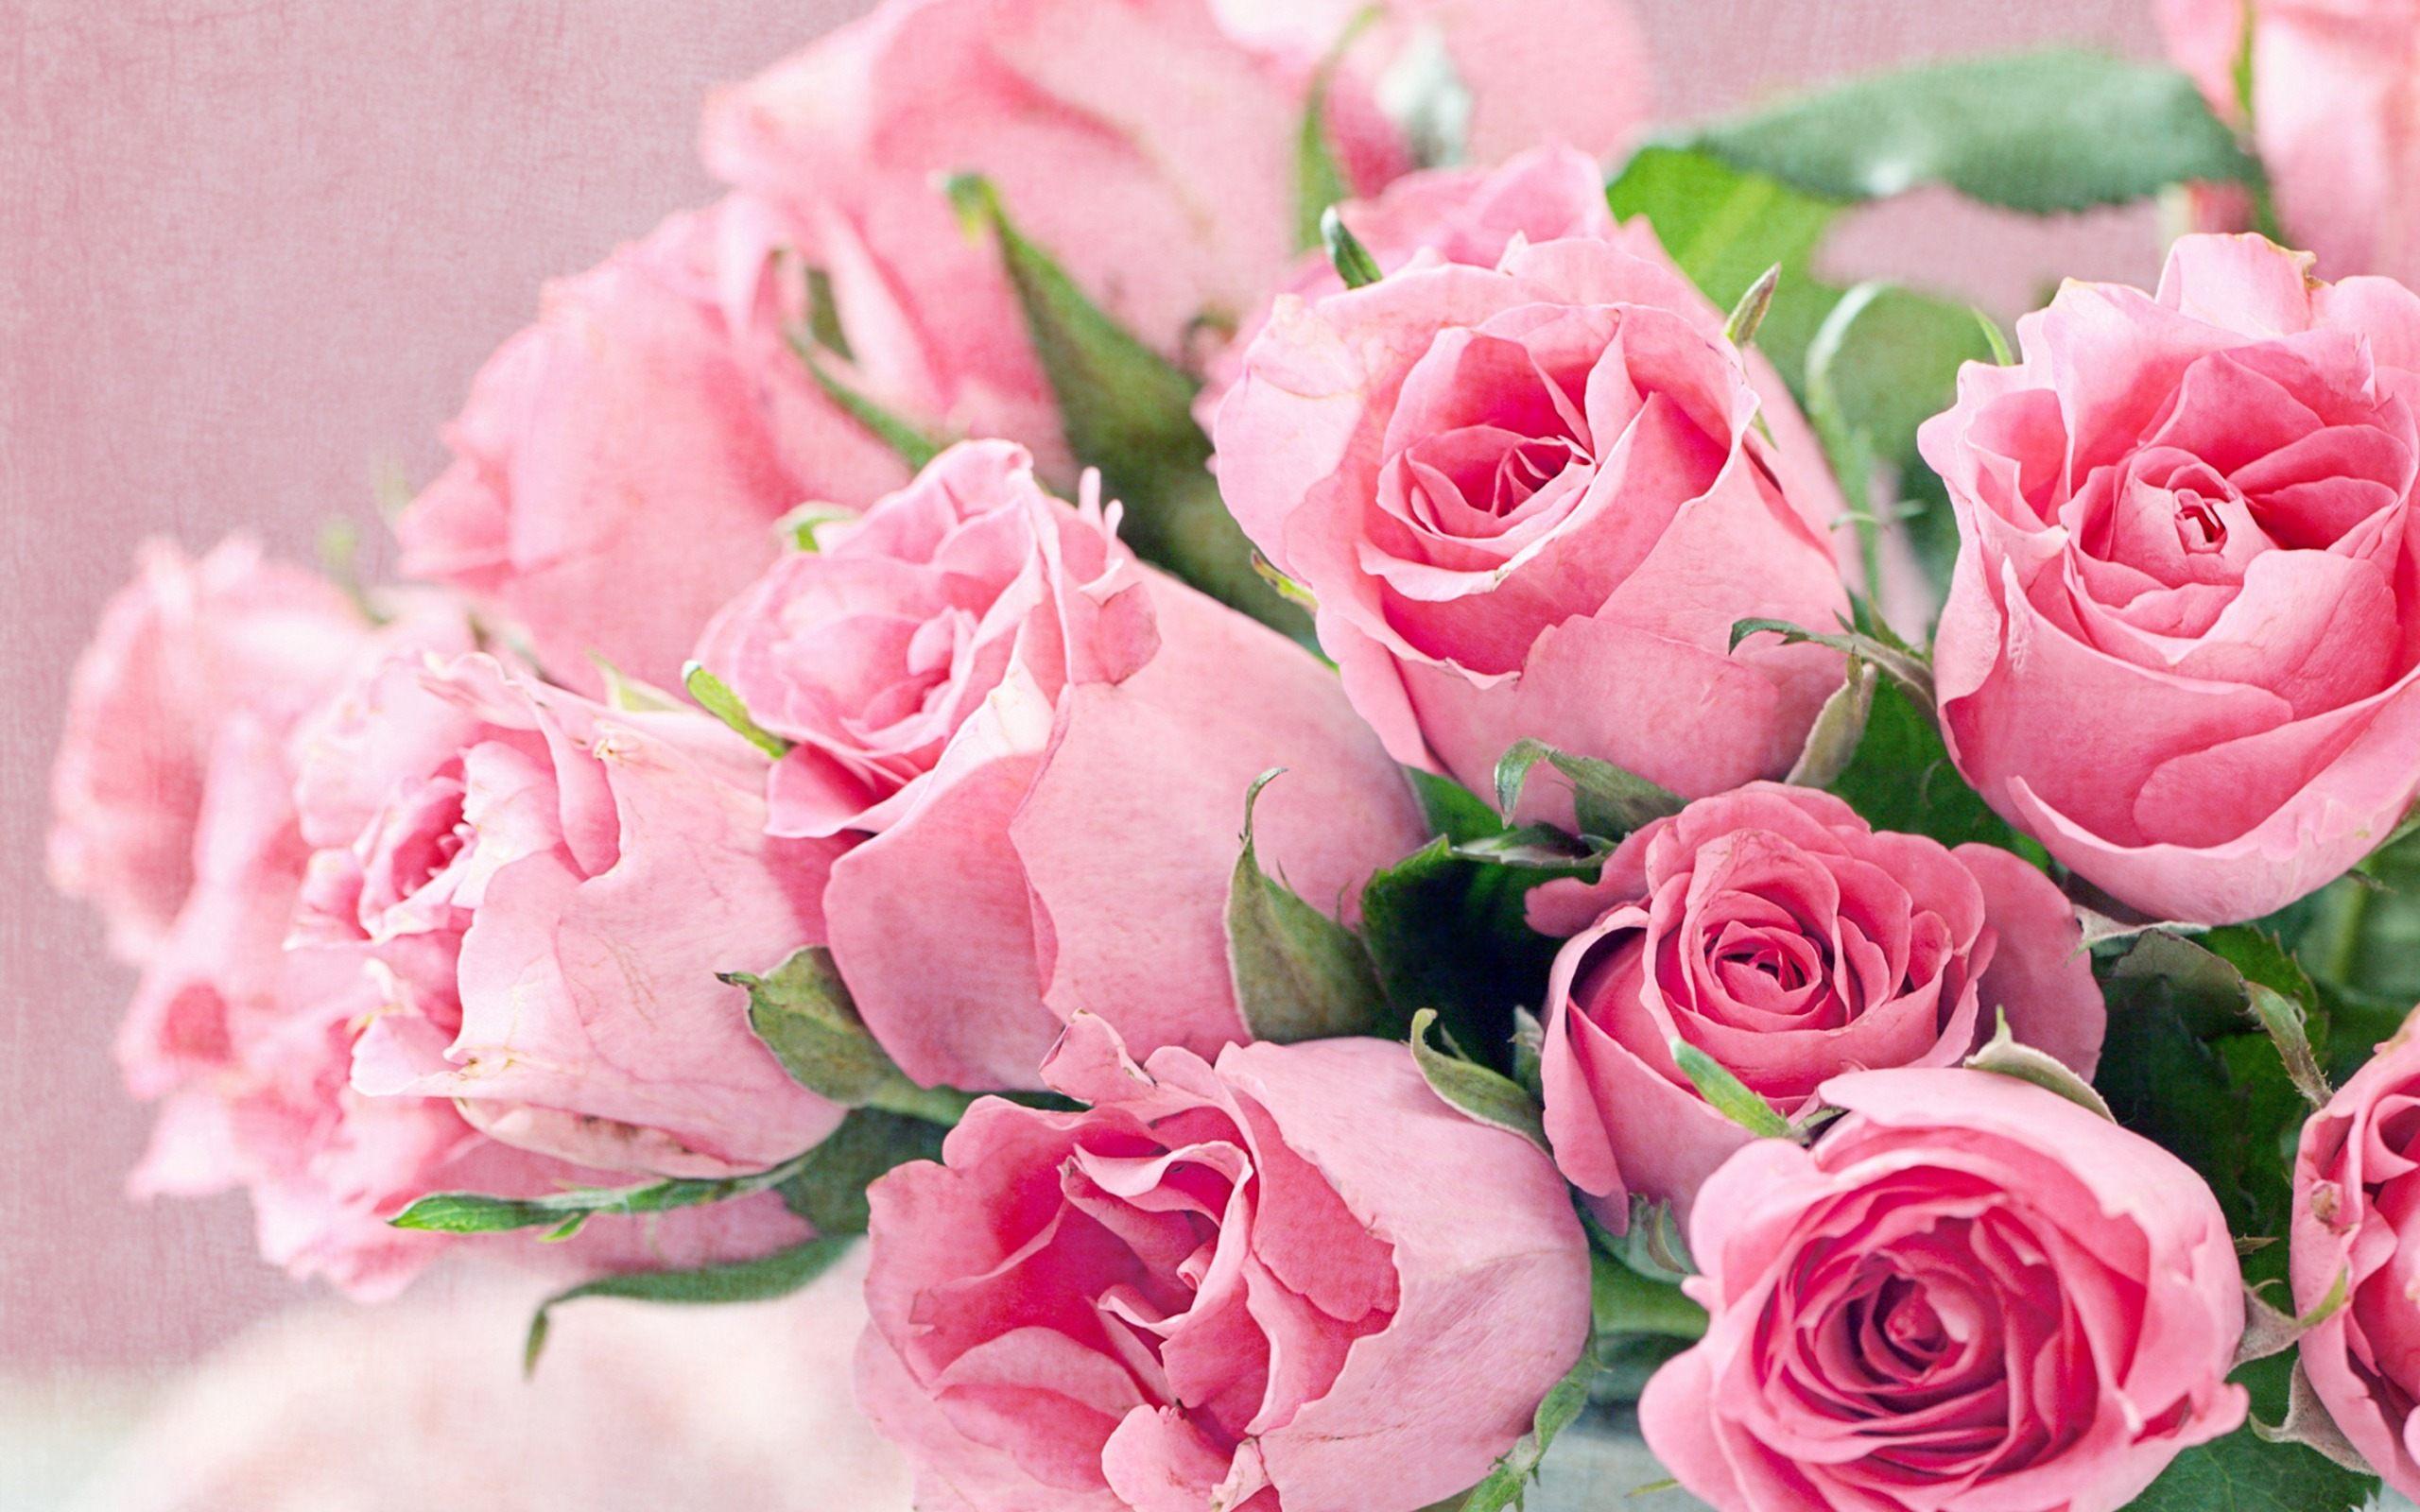 Fresh Flowers Bouquet Of Pink Roses Hd Desktop Backgrounds Free